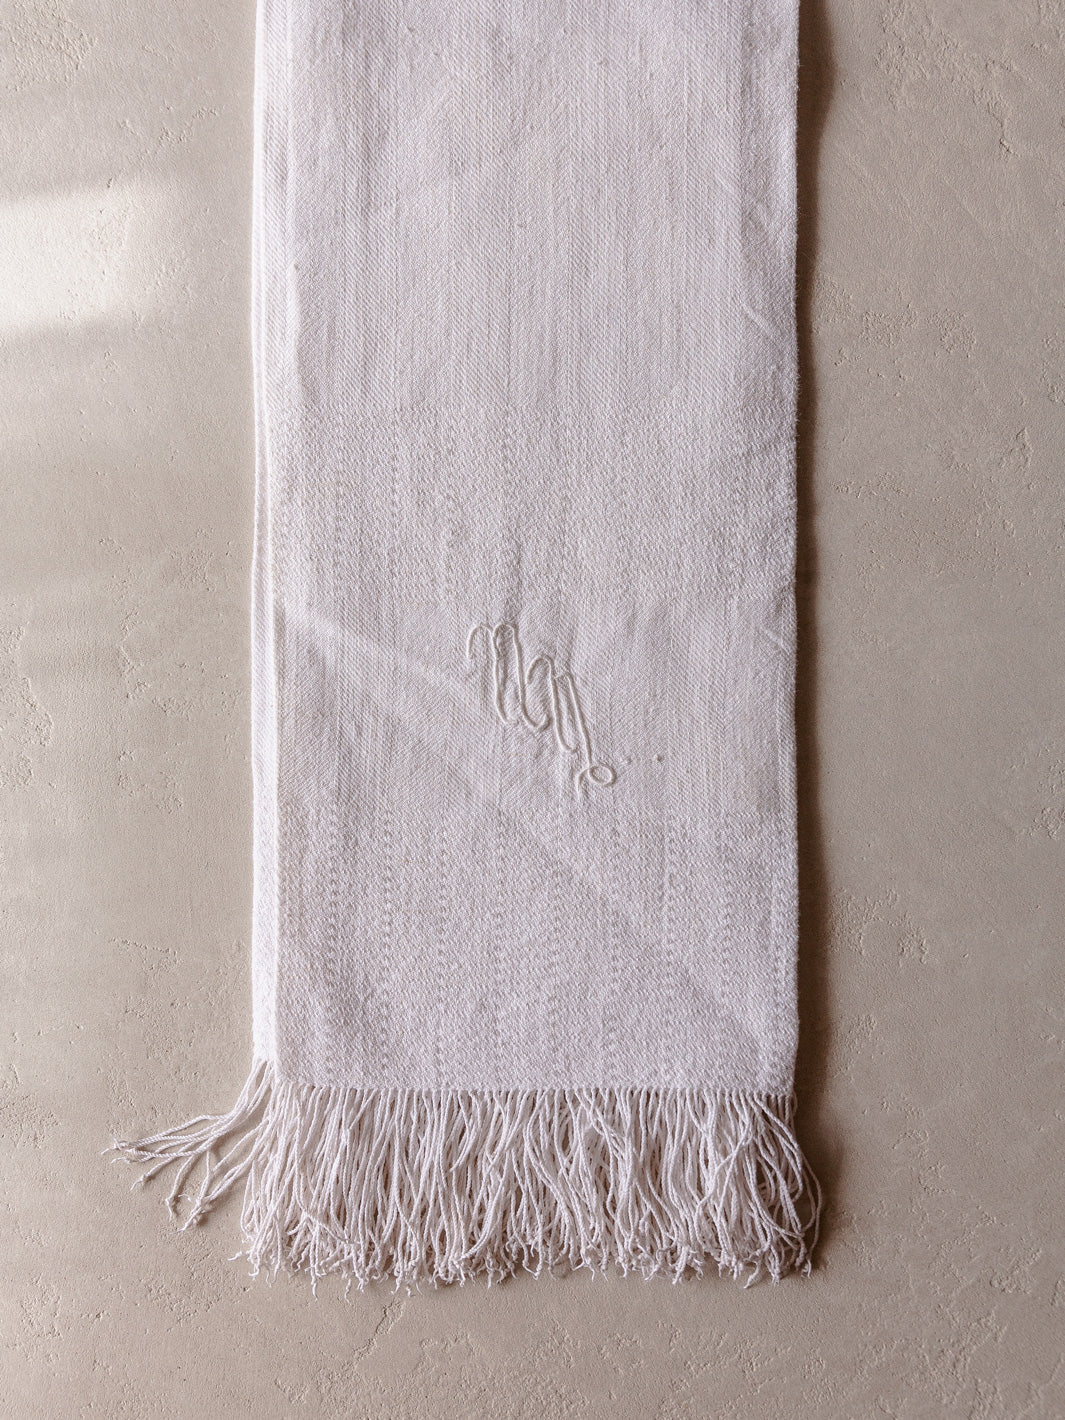 Embroidered 1940s Italian cotton towel